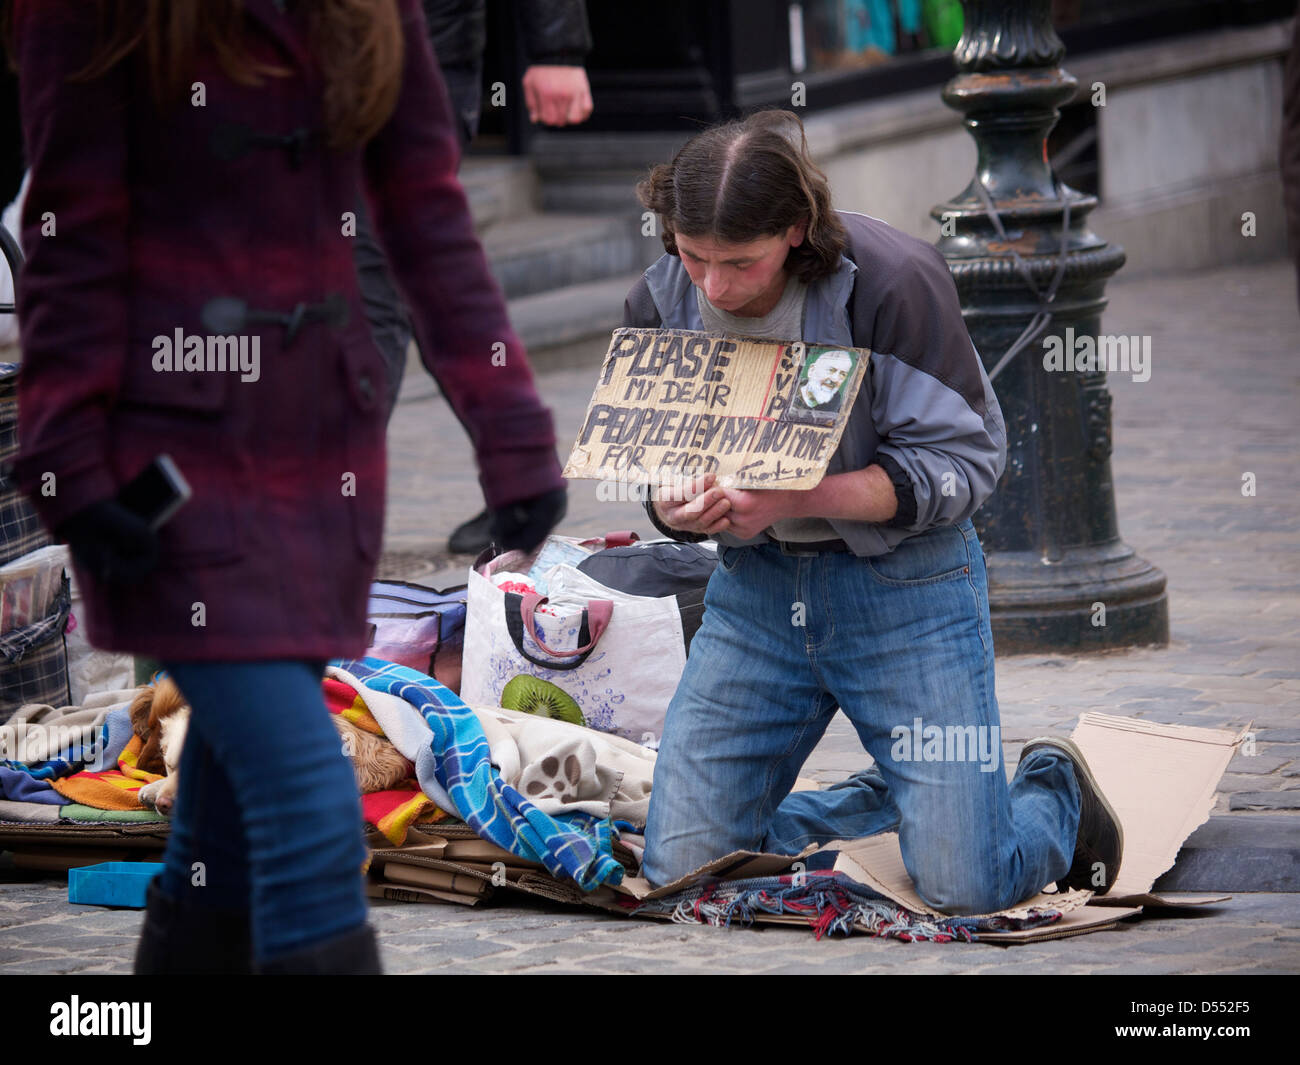 Homeless man begging for money using a sign, in the city centre of Brussels, Belgium Stock Photo